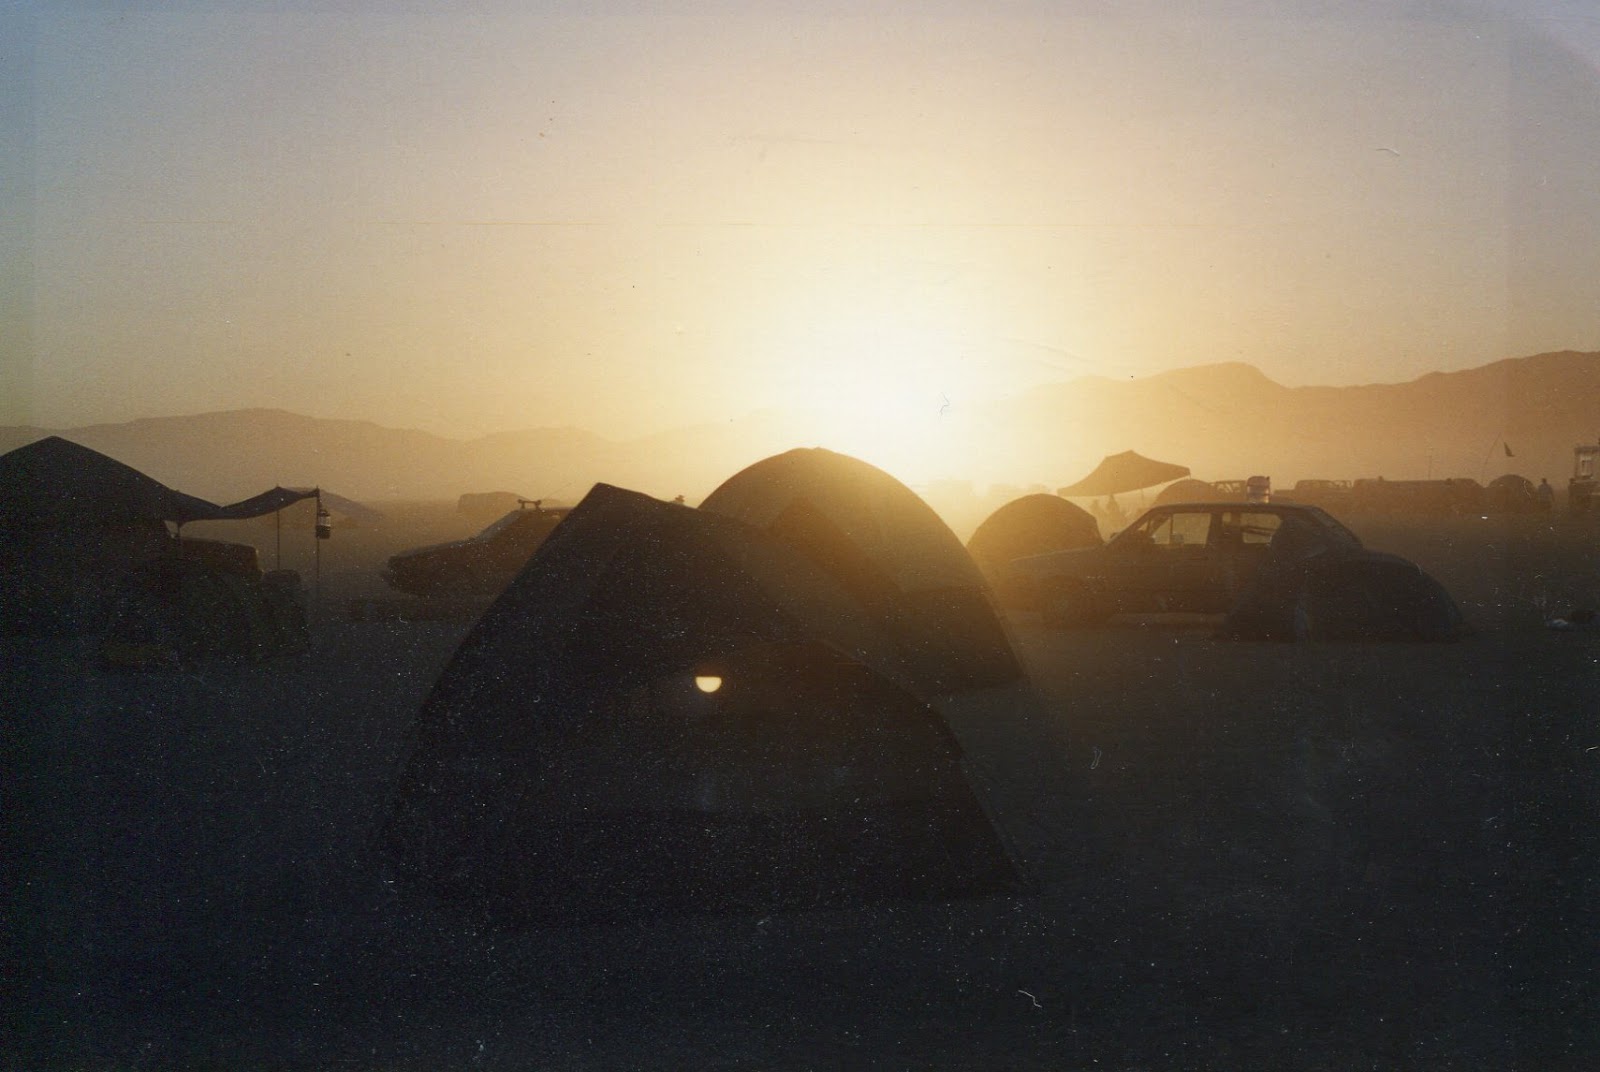 Another 90’s burning man photo [courtesy of Mike Roberts]